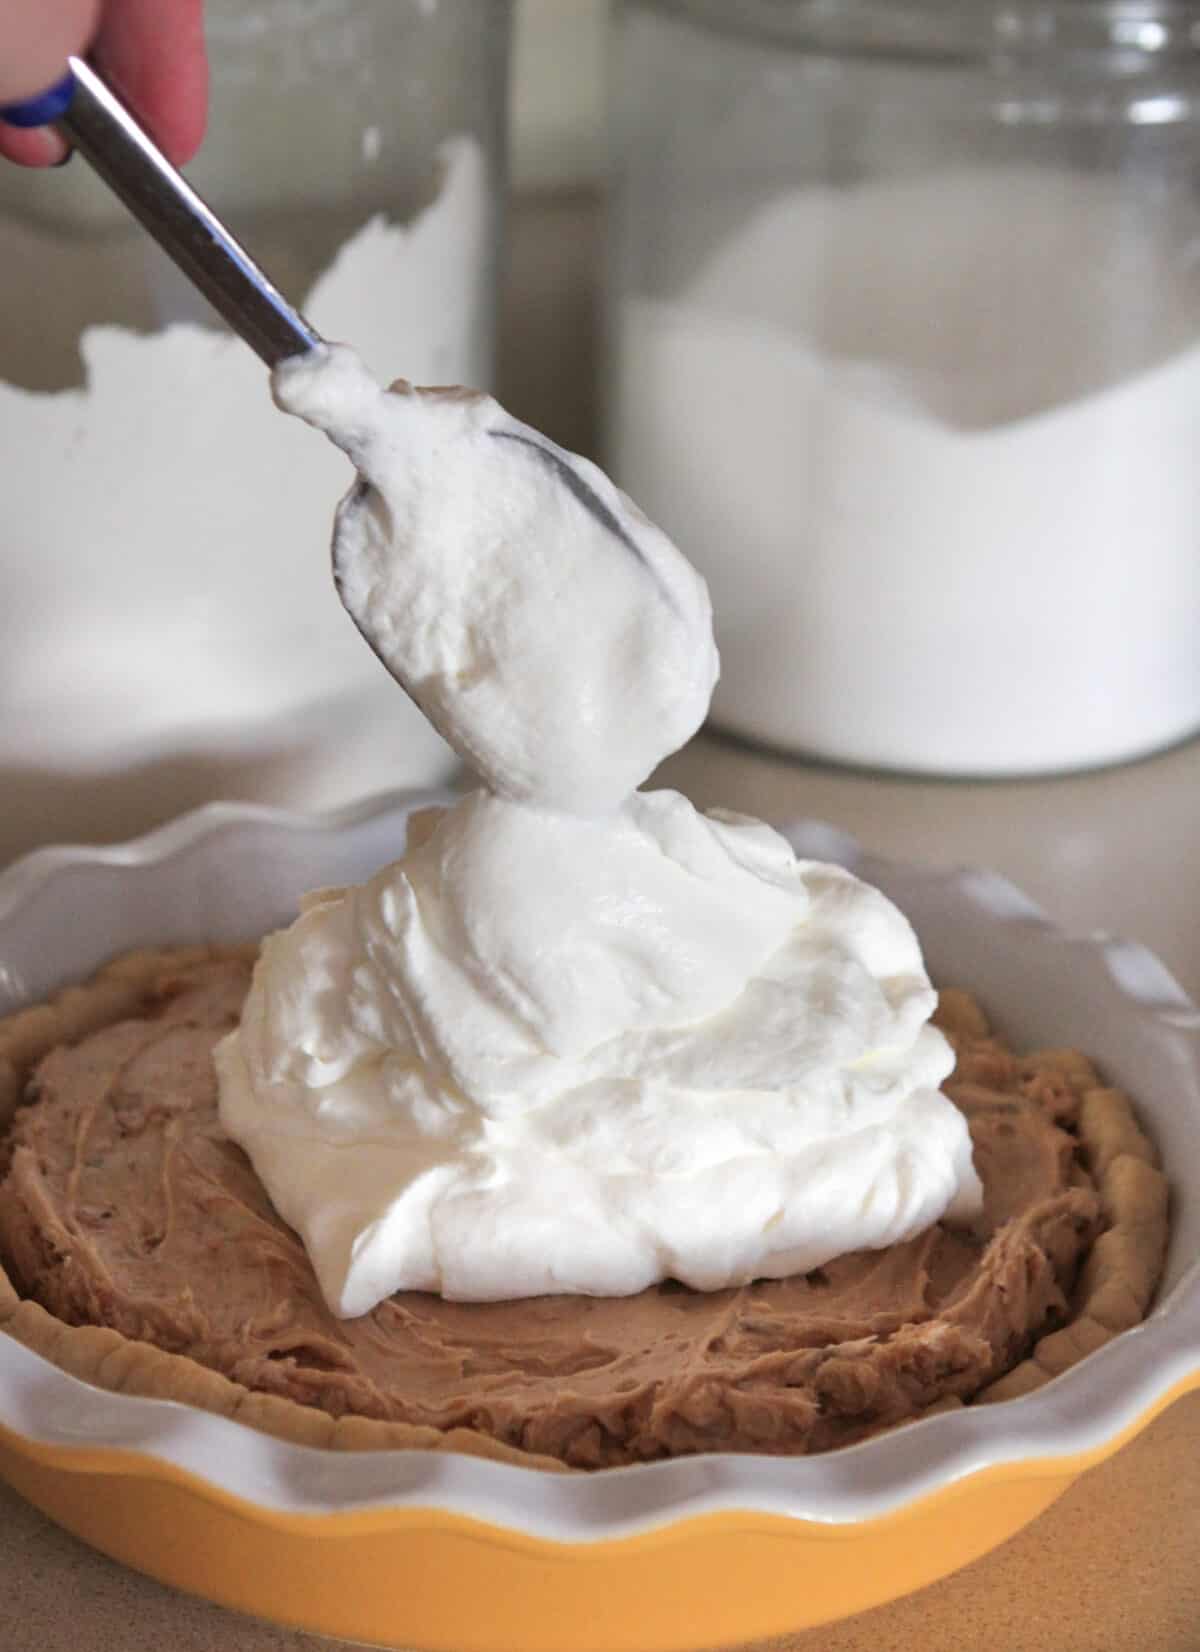 Adding whipped cream to top of pie